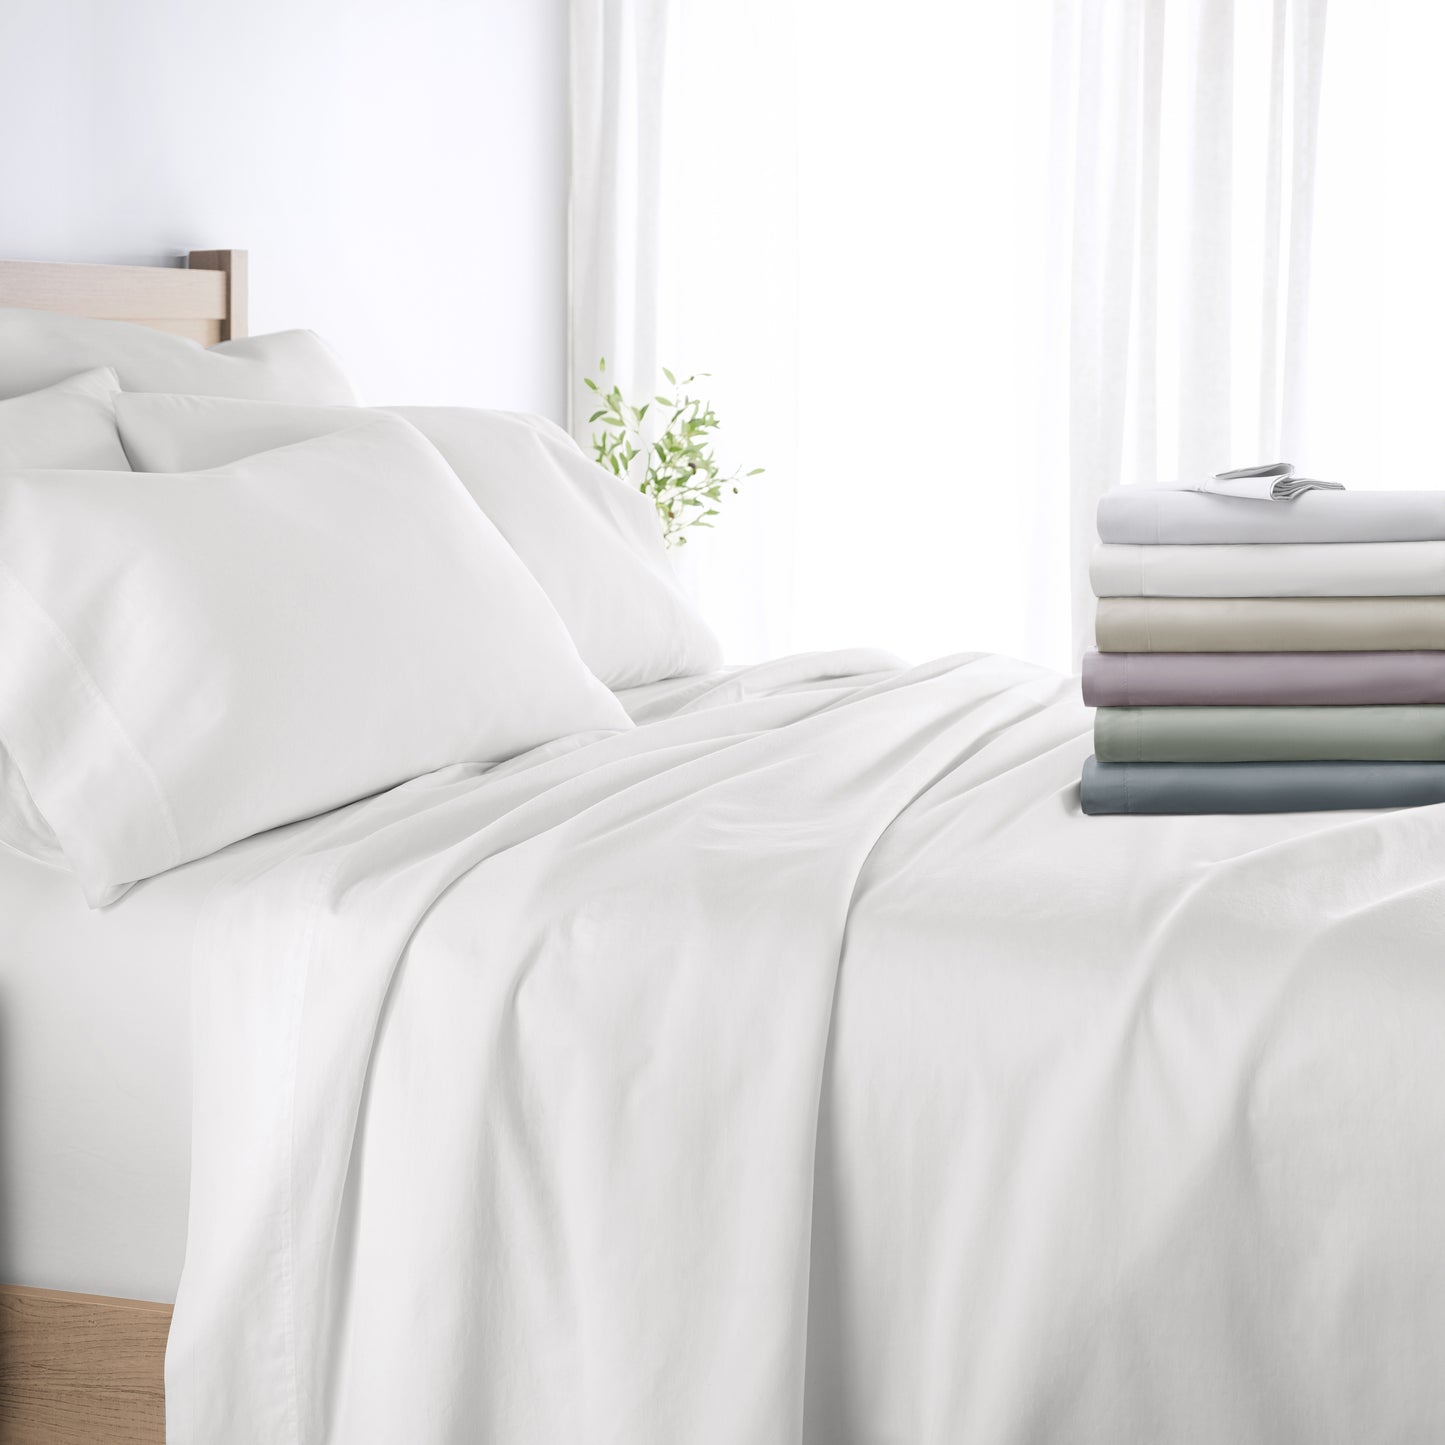 300 Thread Count Cotton Sheet Sets in Solid Colors